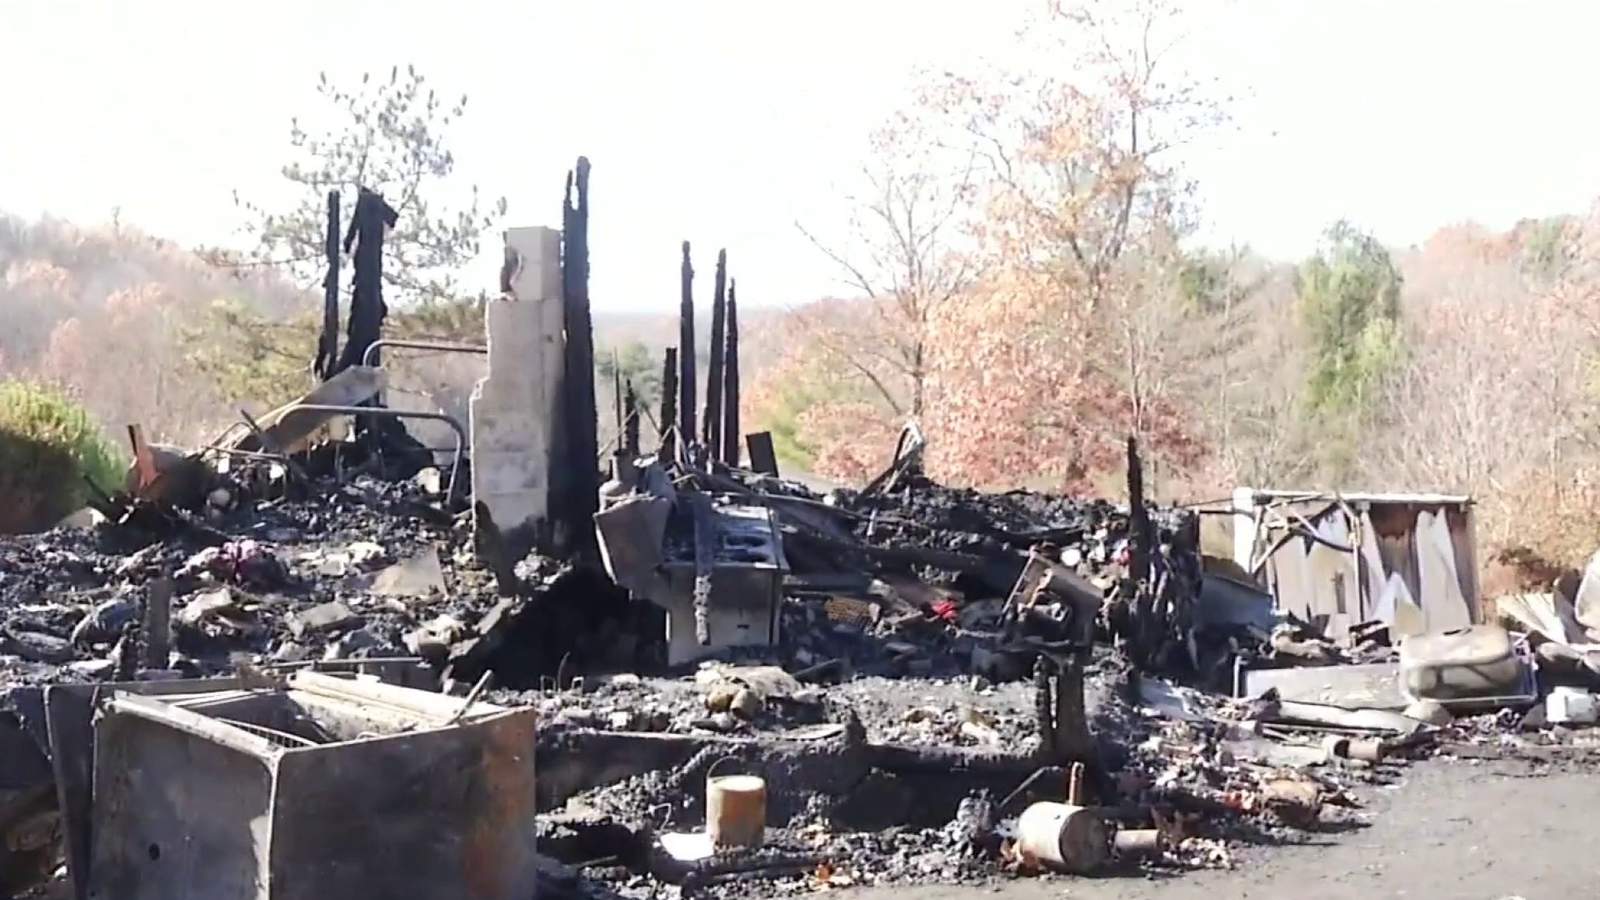 Elderly brother, sister die in Bath County house fire, relative says